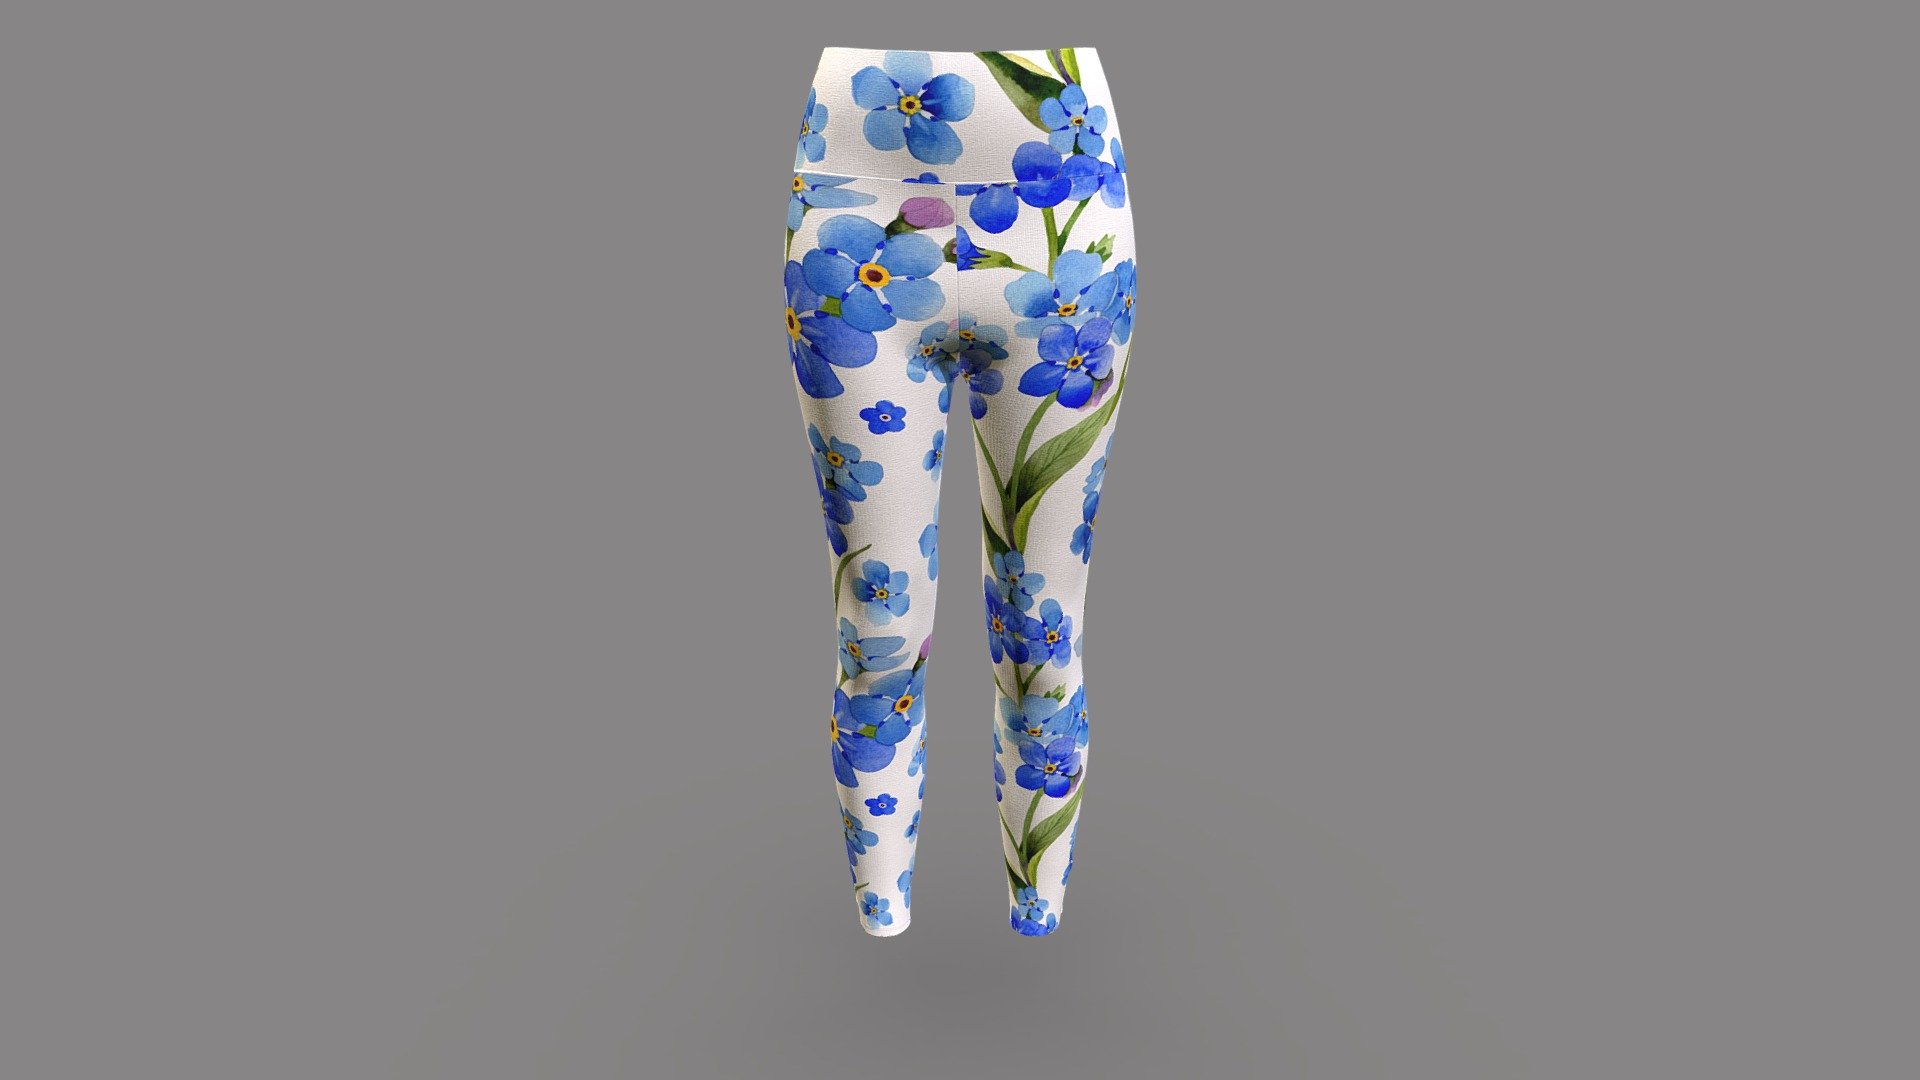 Cloth Title = Printed Leggings Design 

SKU = DG100069 

Category = Women 

Product Type = Leggings 

Cloth Length = Regular 

Body Fit = Fitted  

Occasion = Activewear  

Waist Rise = High Rise


Our Services:

3D Apparel Design.

OBJ,FBX,GLTF Making with High/Low Poly.

Fabric Digitalization.

Mockup making.

3D Teck Pack.

Pattern Making.

2D Illustration.

Cloth Animation and 360 Spin Video.


Contact us:- 

Email: info@digitalfashionwear.com 

Website: https://digitalfashionwear.com 

WhatsApp No: +8801759350445 


We designed all the types of cloth specially focused on product visualization, e-commerce, fitting, and production. 

We will design: 

T-shirts 

Polo shirts 

Hoodies 

Sweatshirt 

Jackets 

Shirts 

TankTops 

Trousers 

Bras 

Underwear 

Blazer 

Aprons 

Leggings 

and All Fashion items. 





Our goal is to make sure what we provide you, meets your demand 3d model